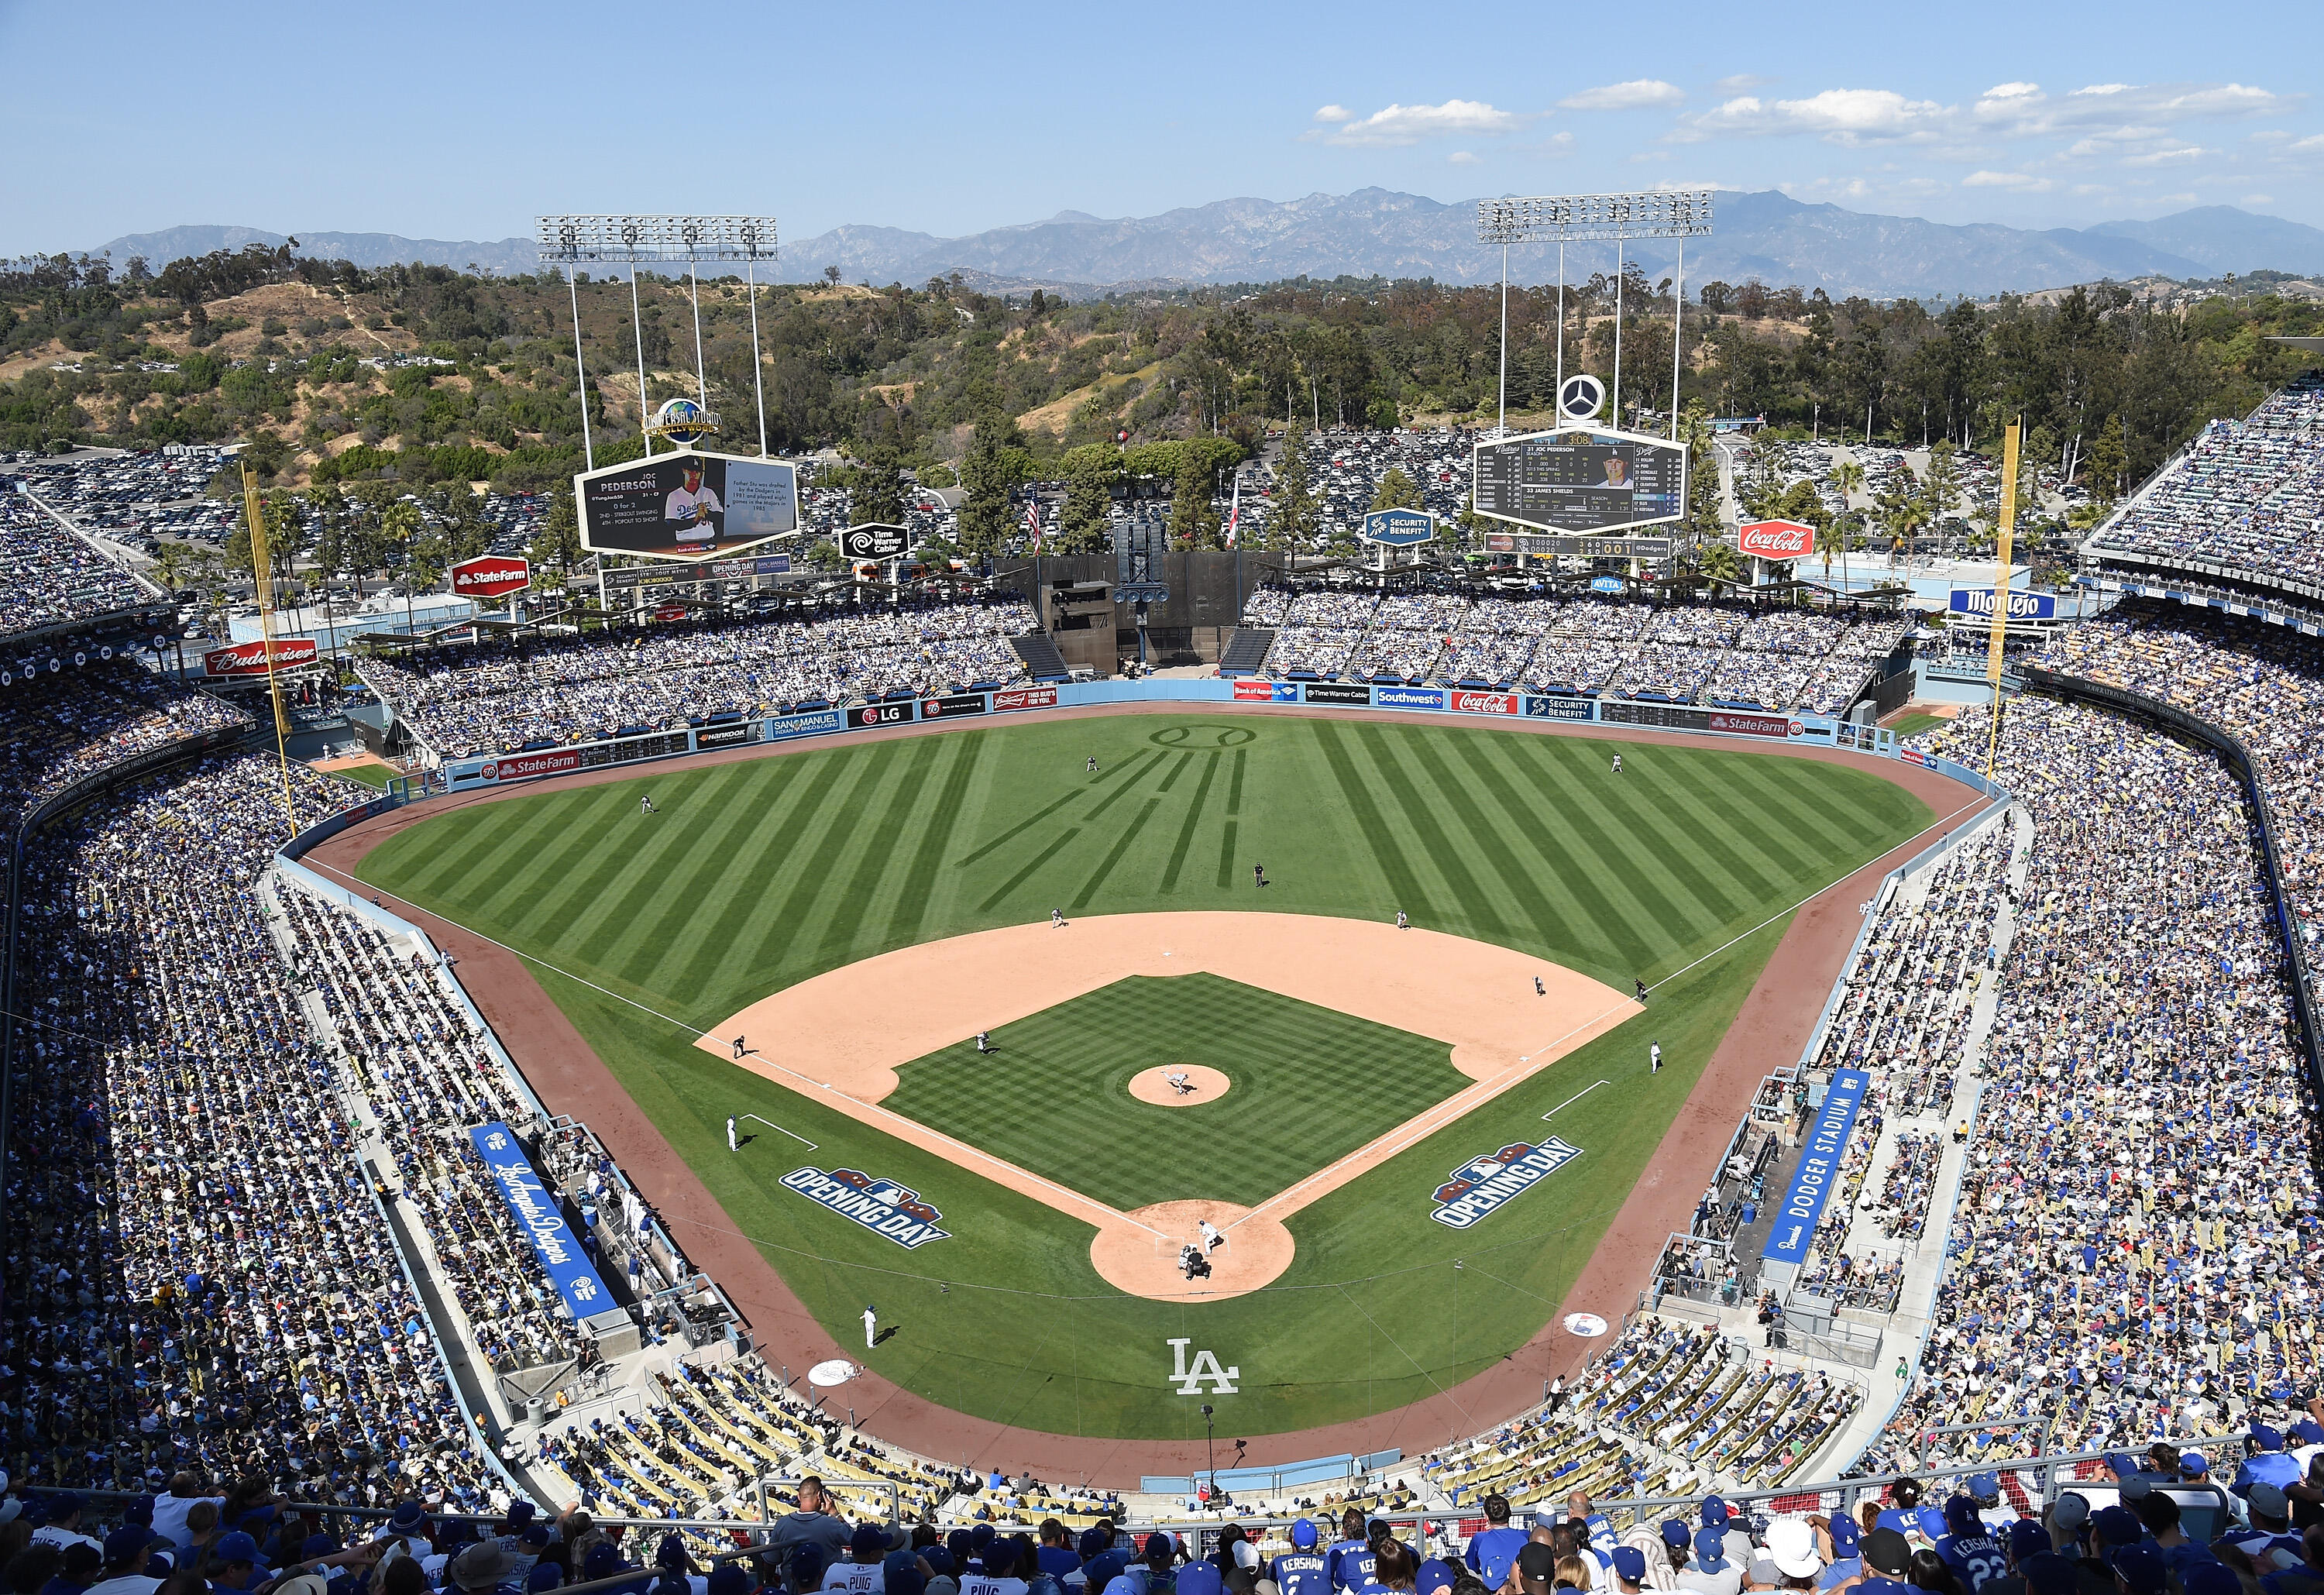 LOS ANGELES, CA - APRIL 06:  General view as James Shields #33 of the San Diego Padres pitches against the Los Angeles Dodgers during opening day at Dodger Stadium on April 6, 2015 in Los Angeles, California.  (Photo by Harry How/Getty Images)